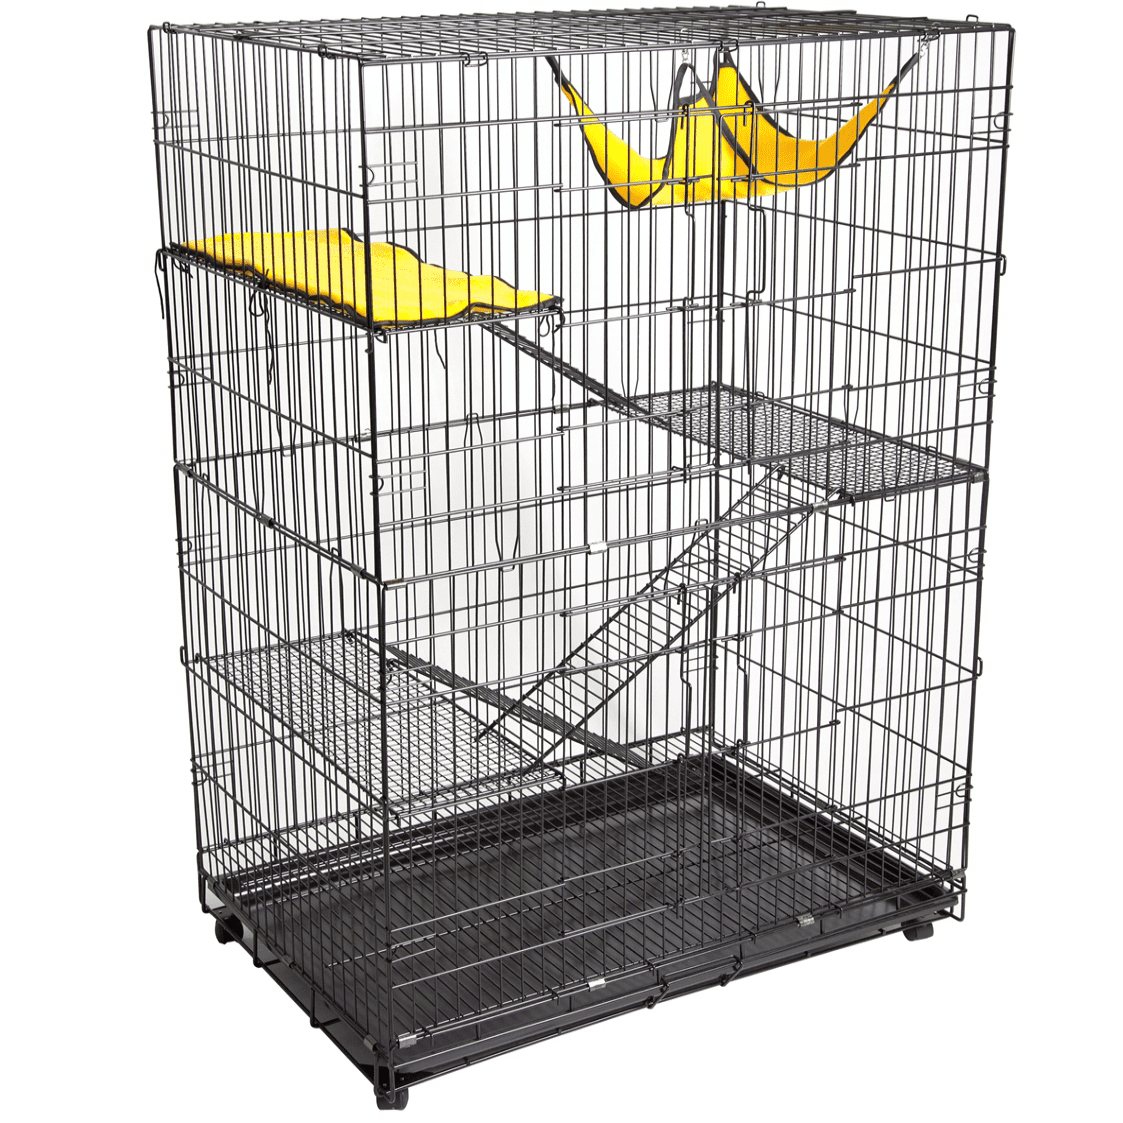 Oliver Guinea Pig Cage - Coops and cages